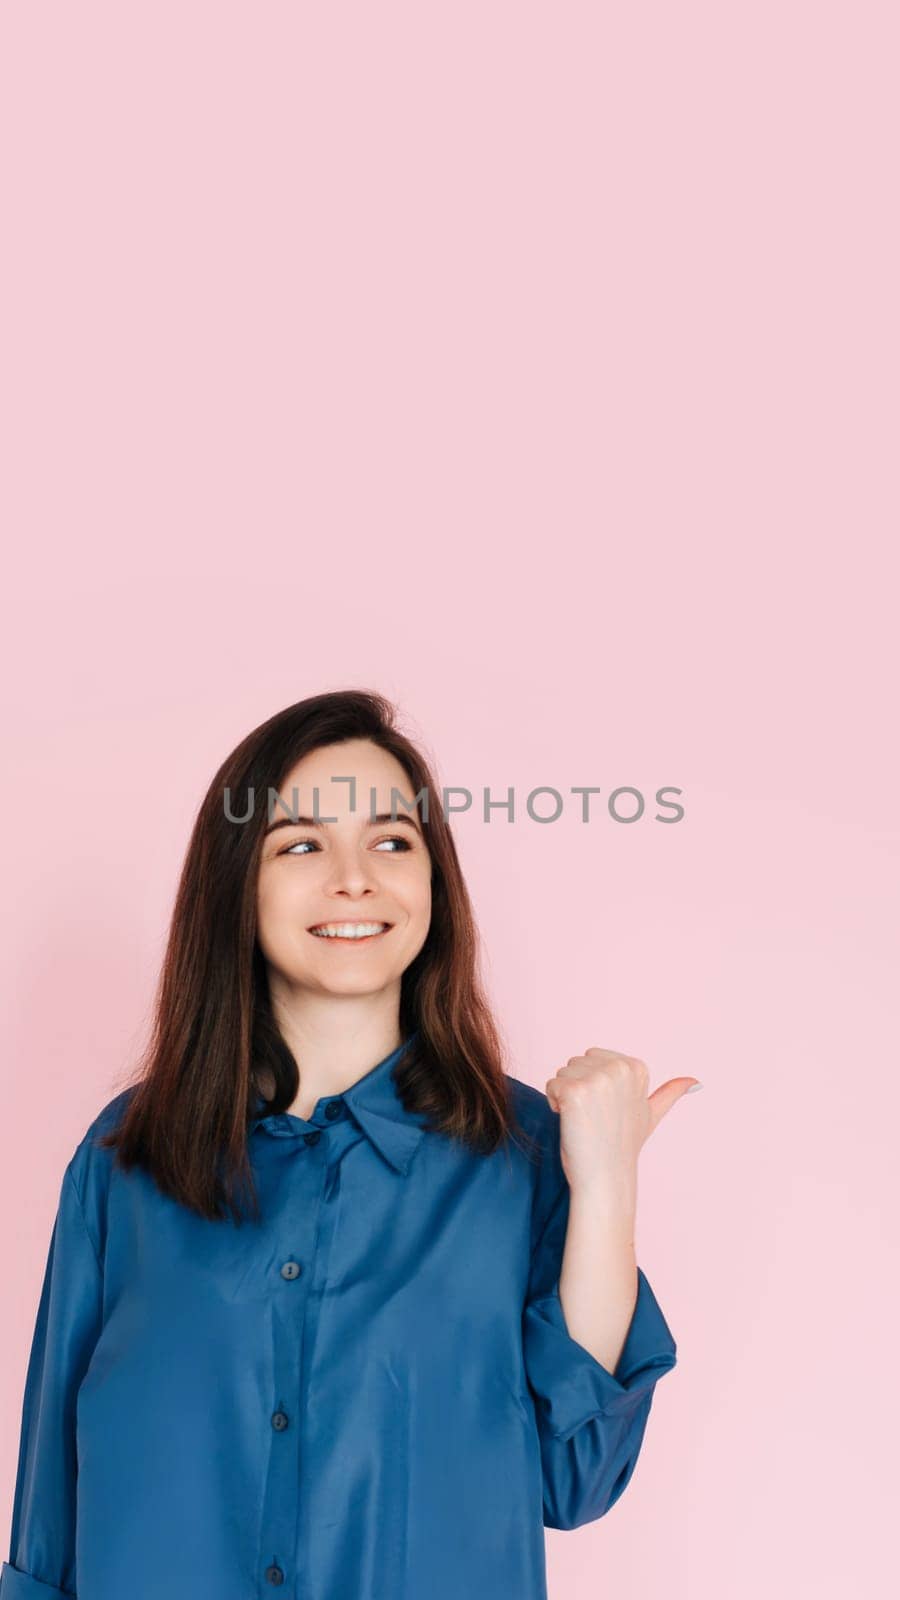 Radiant Portrait of Beautiful Woman with Joyful Smile, Pointing Finger and Looking at Empty Space, Isolated on Pink Background - News and Excitement Concept.